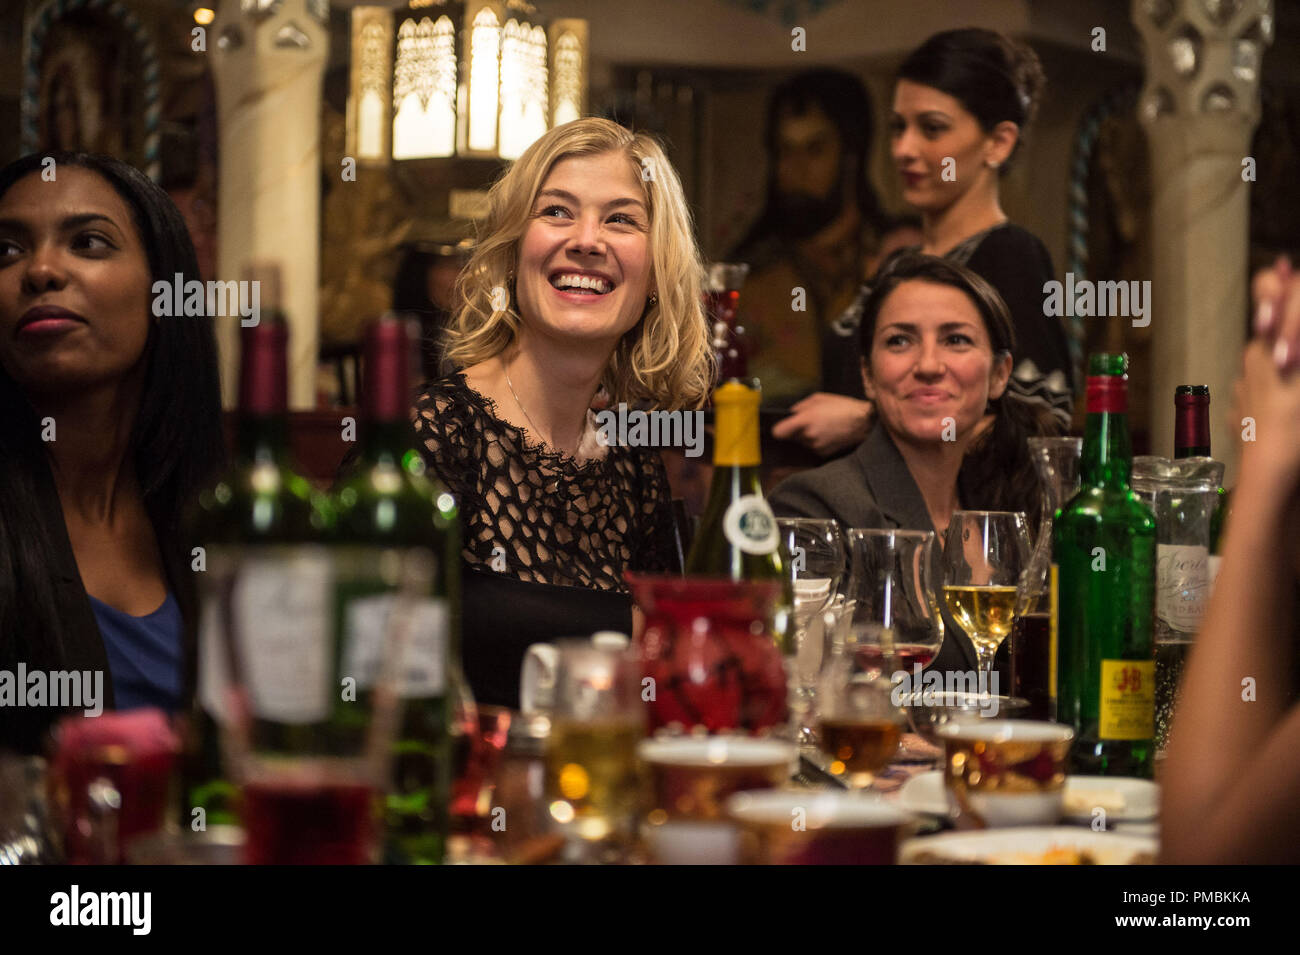 ROSAMUND PIKE stars in Relativity Media's HECTOR AND THE SEARCH FOR HAPPINESS. ..Photo Credit: Ed Araquel (c) 2014 Egoli Tossell Film/ Co-Produktionsgesellschaft ''''Hector 1'''' GmbH & Co. KG/ Happiness Productions Inc./ Wild Bunch Germany/ Construction Film' Stock Photo